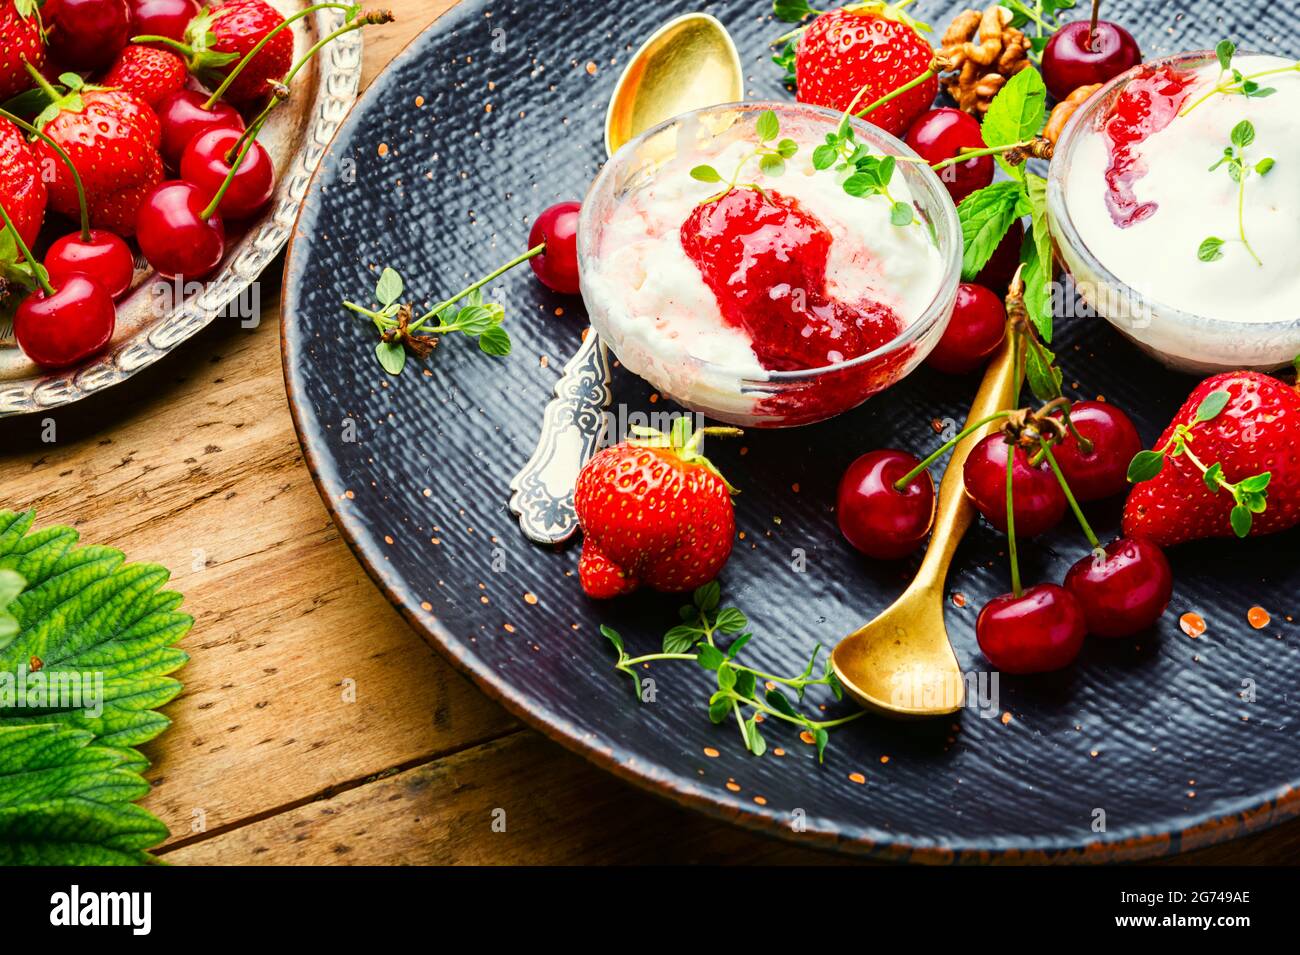 Summer dessert, ice cream with strawberries and cherries.Ice cream with berry jam on wooden table Stock Photo